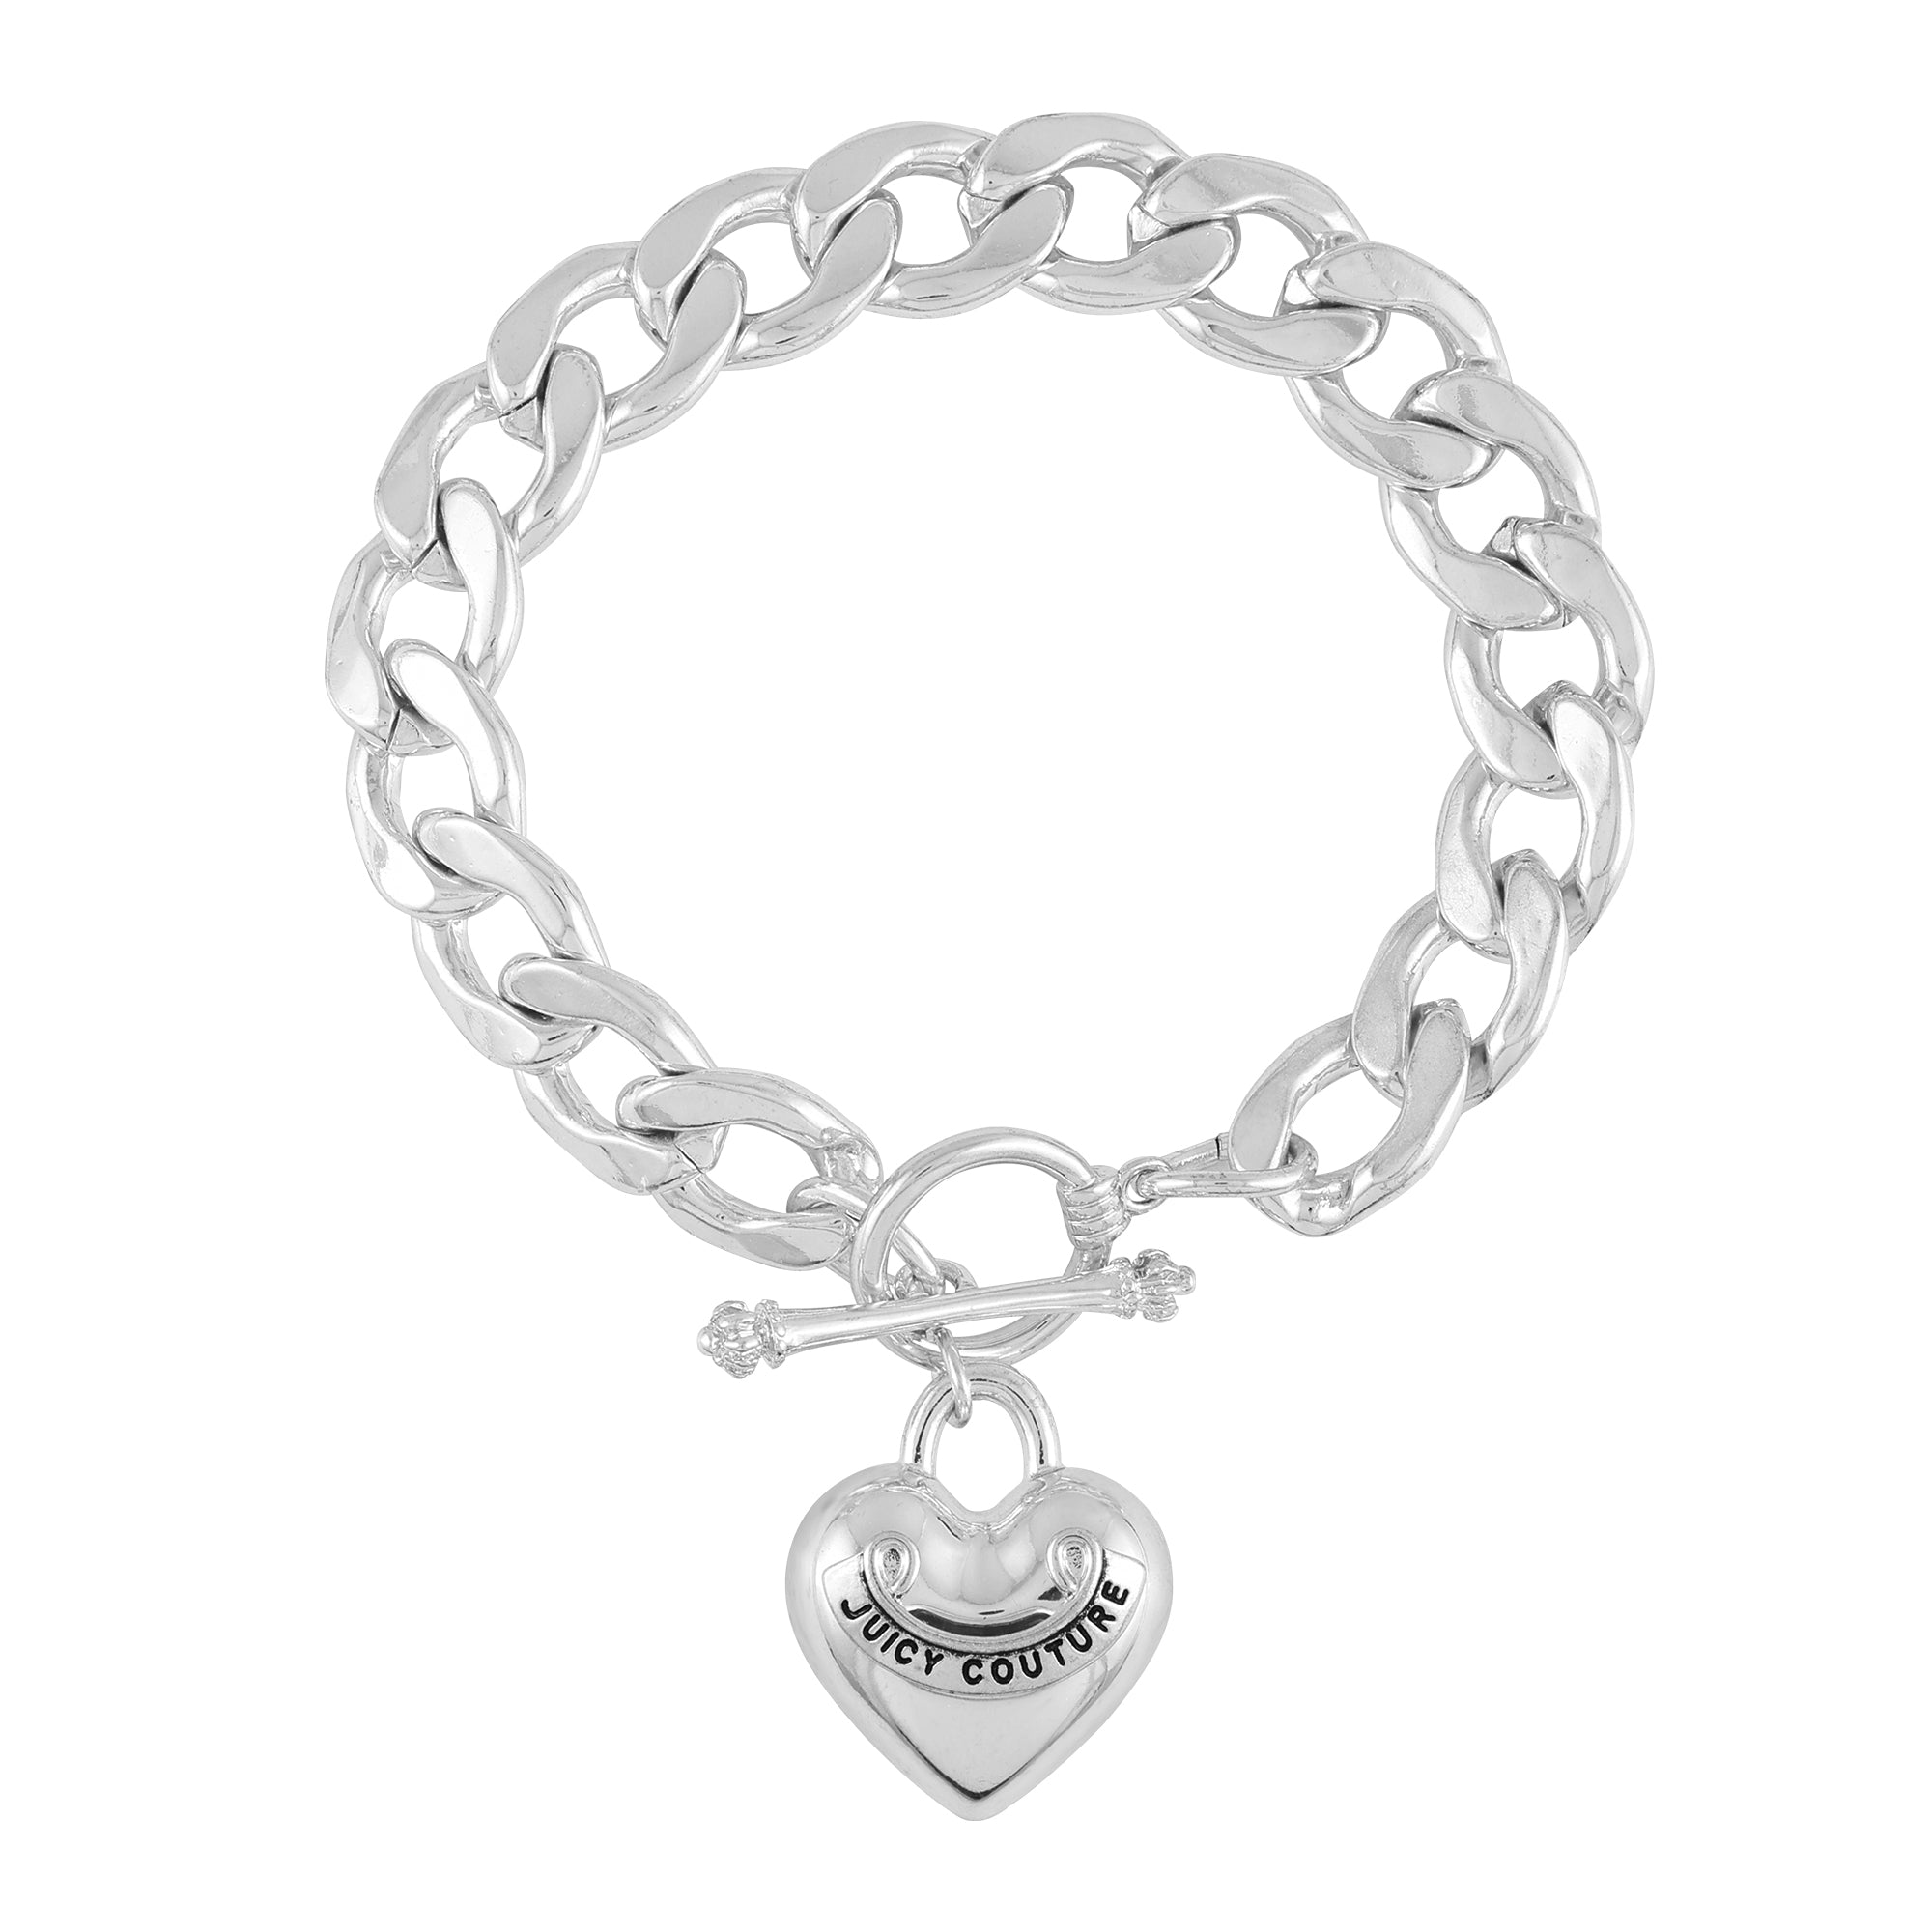 Juicy Couture Silvertone Heart Charm Toggle Necklace For in Metallic